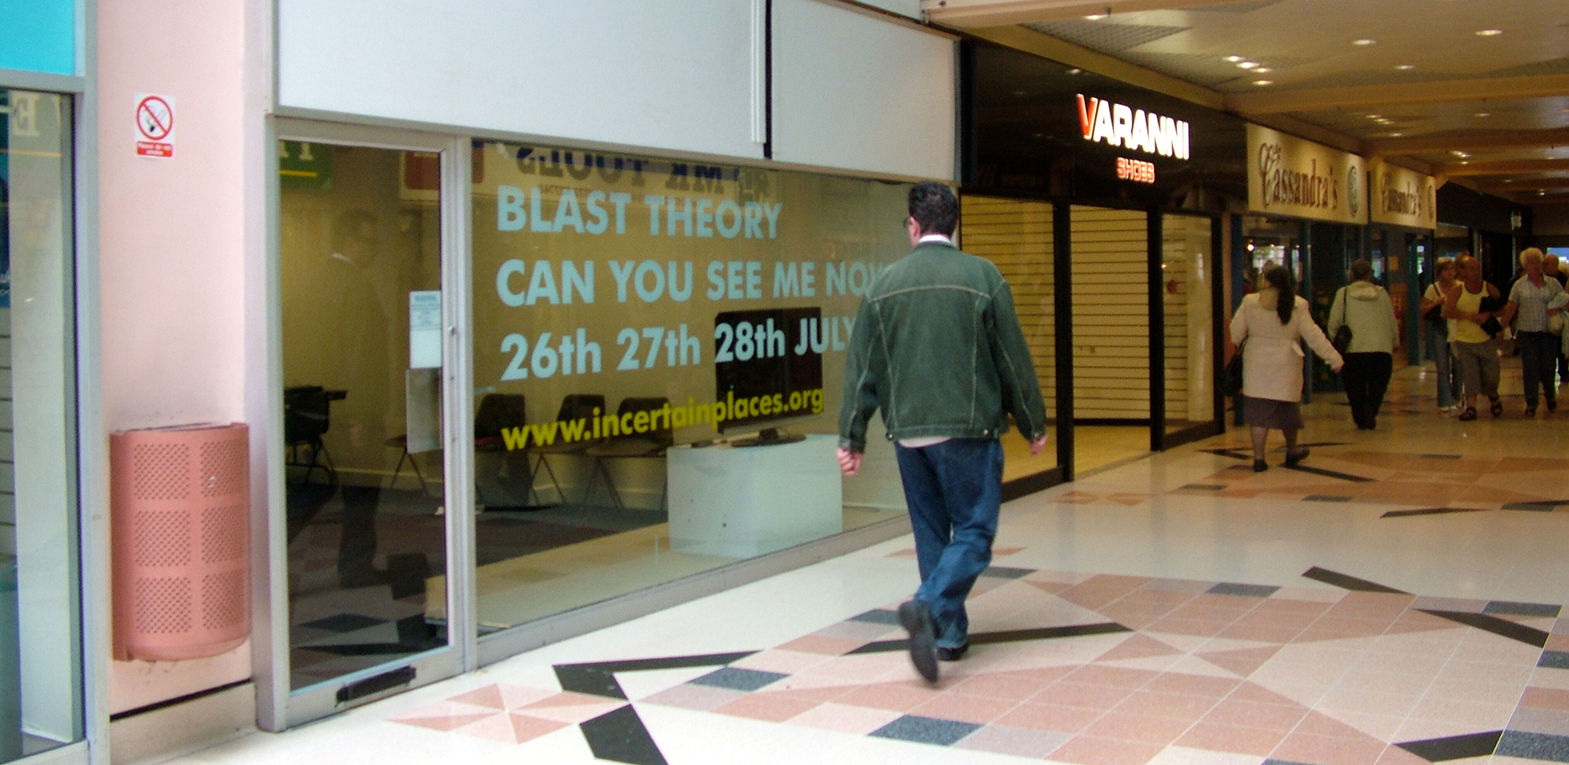 A man walks past a shop unit with the text displayed in the window 'Blast Theory, Can you see me now' and the dates.